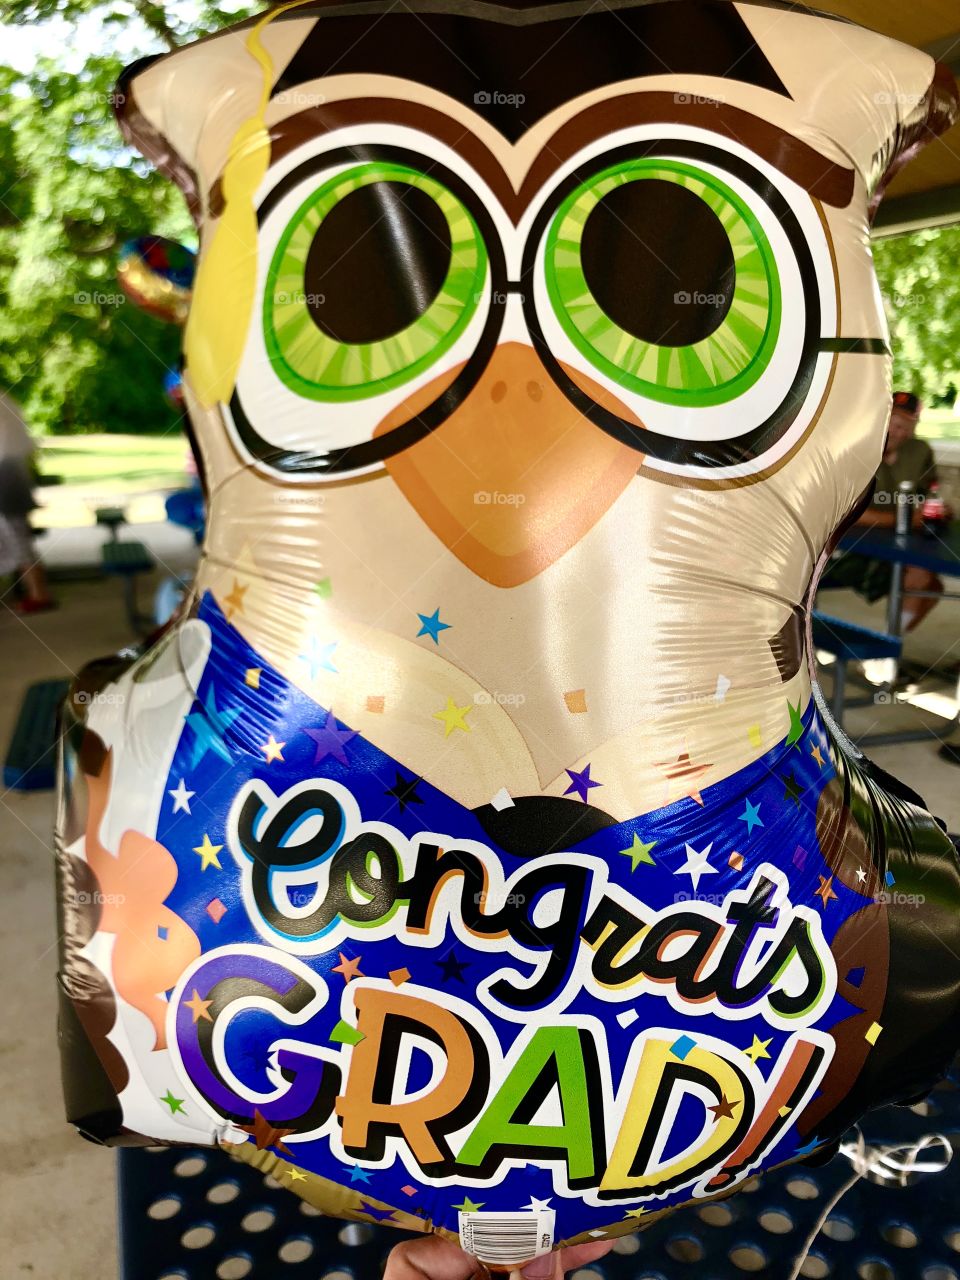 The graduation party was such a hoot! 